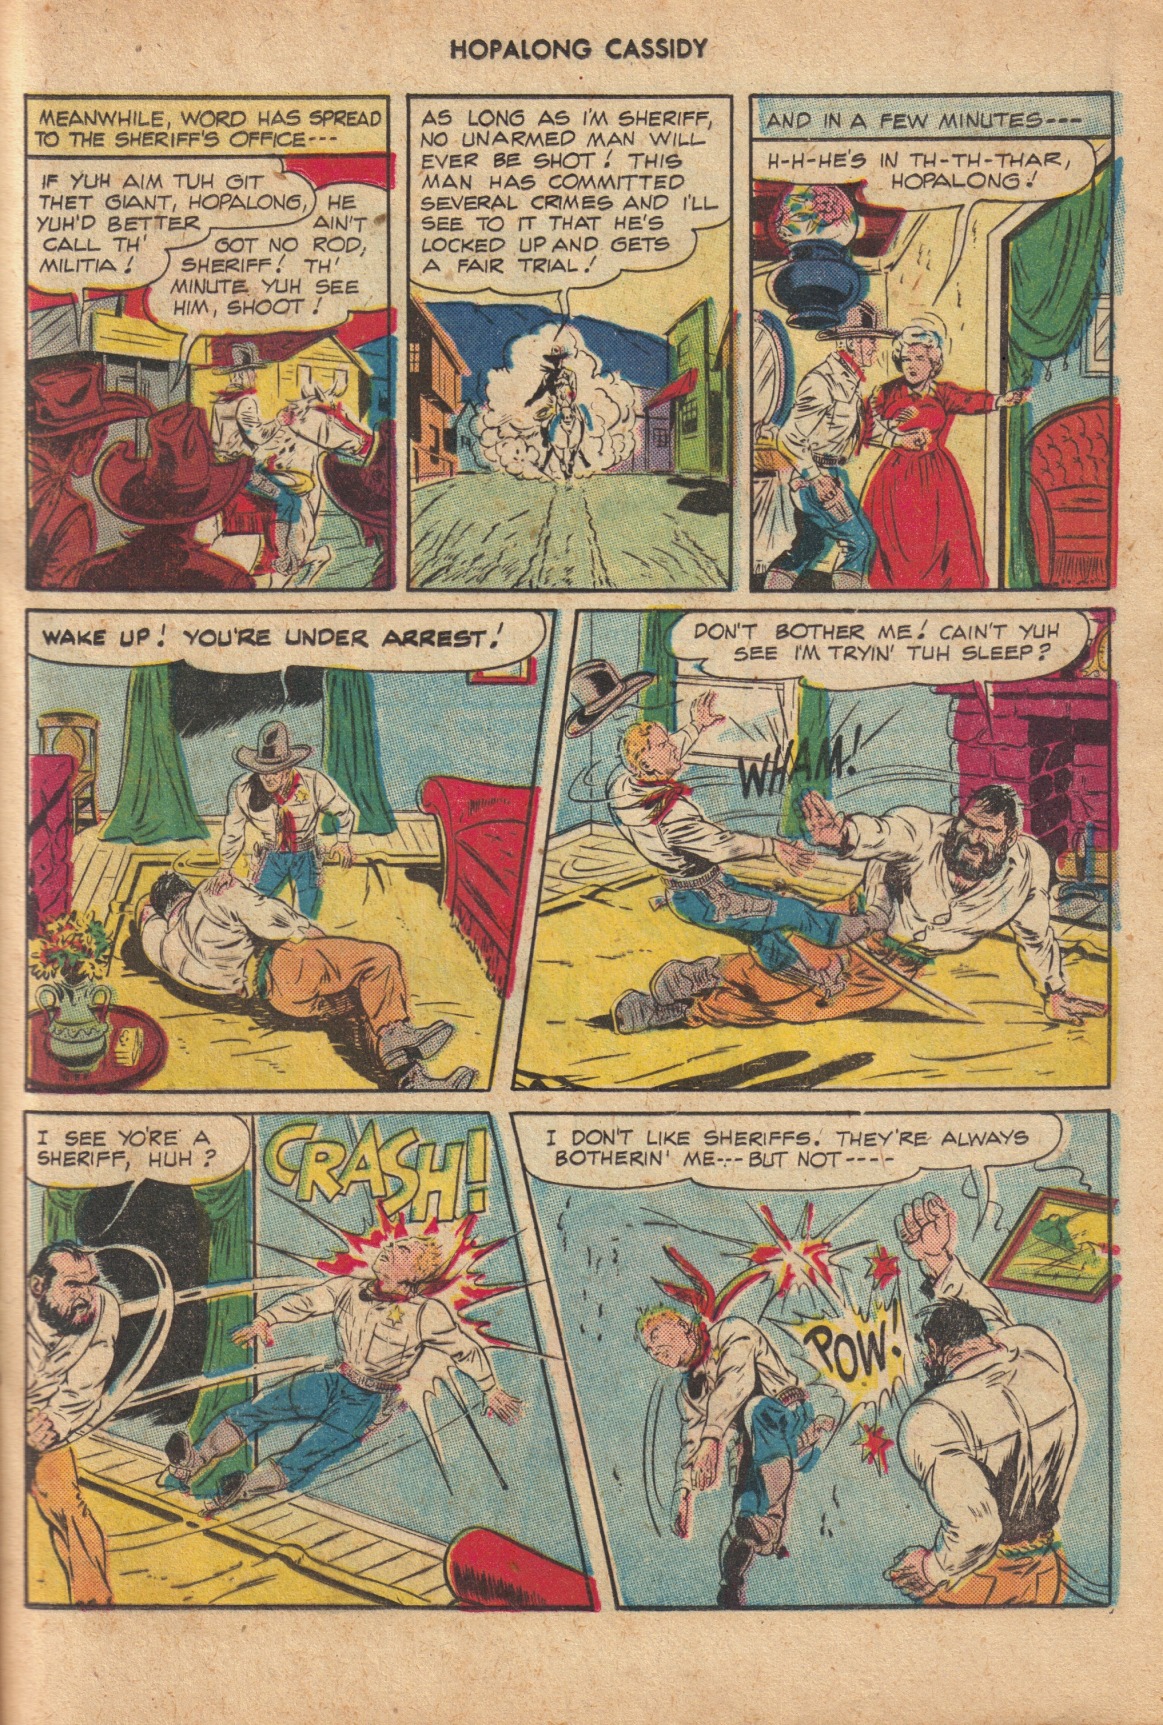 Read online Hopalong Cassidy comic -  Issue #24 - 25